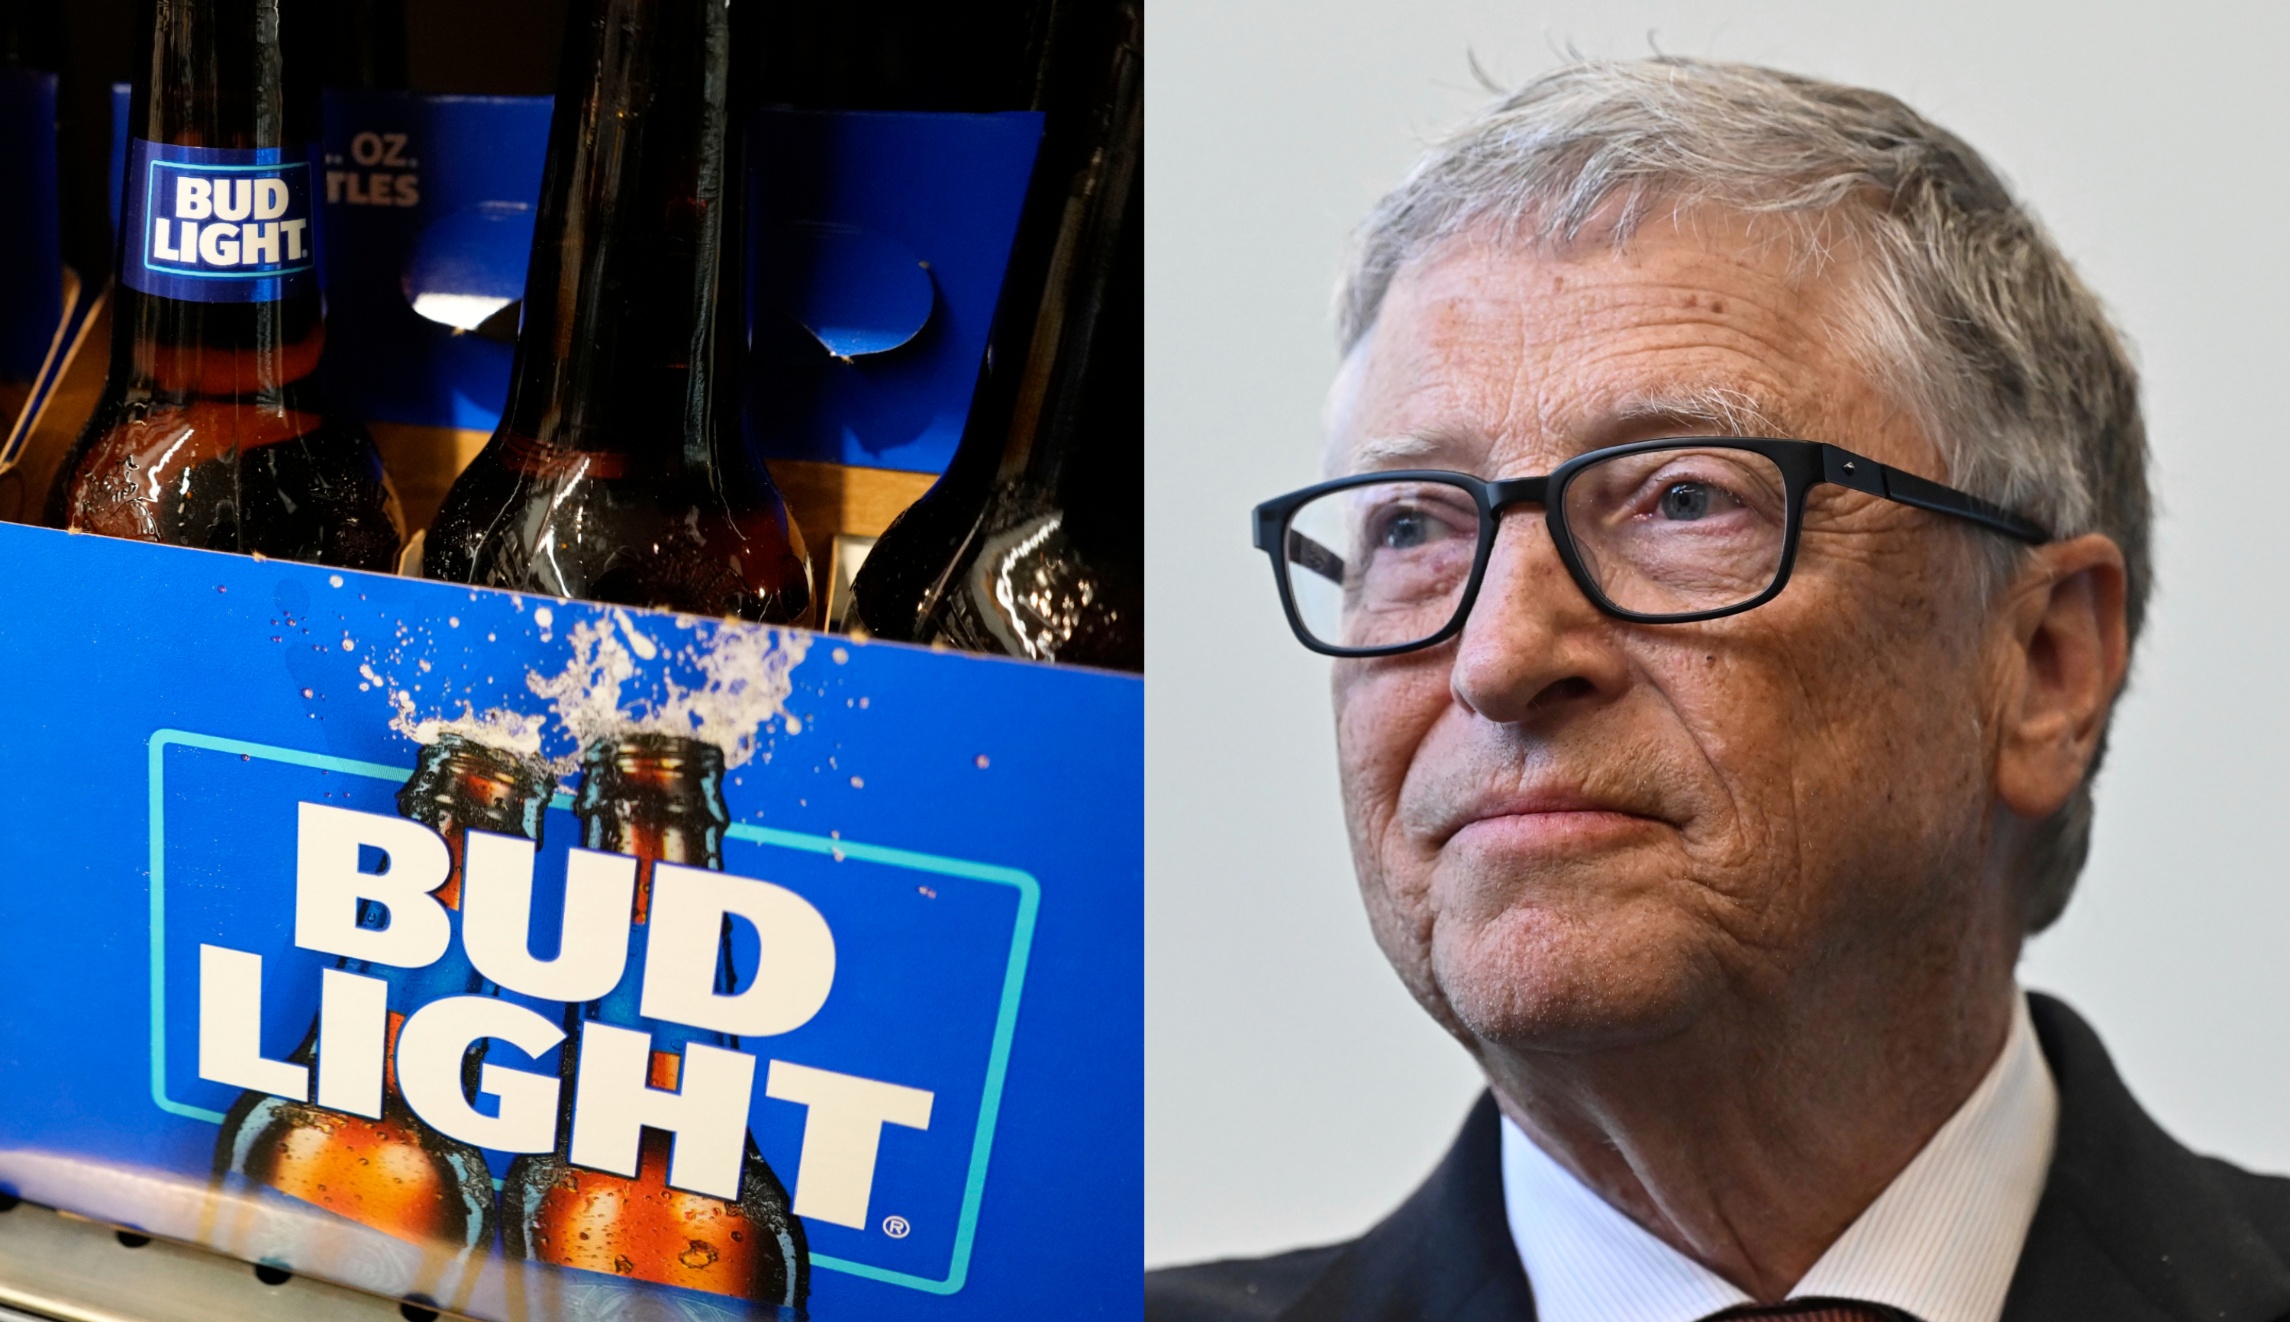 Bill Gates buys up over $95 million of Anheuser-Busch shares in 